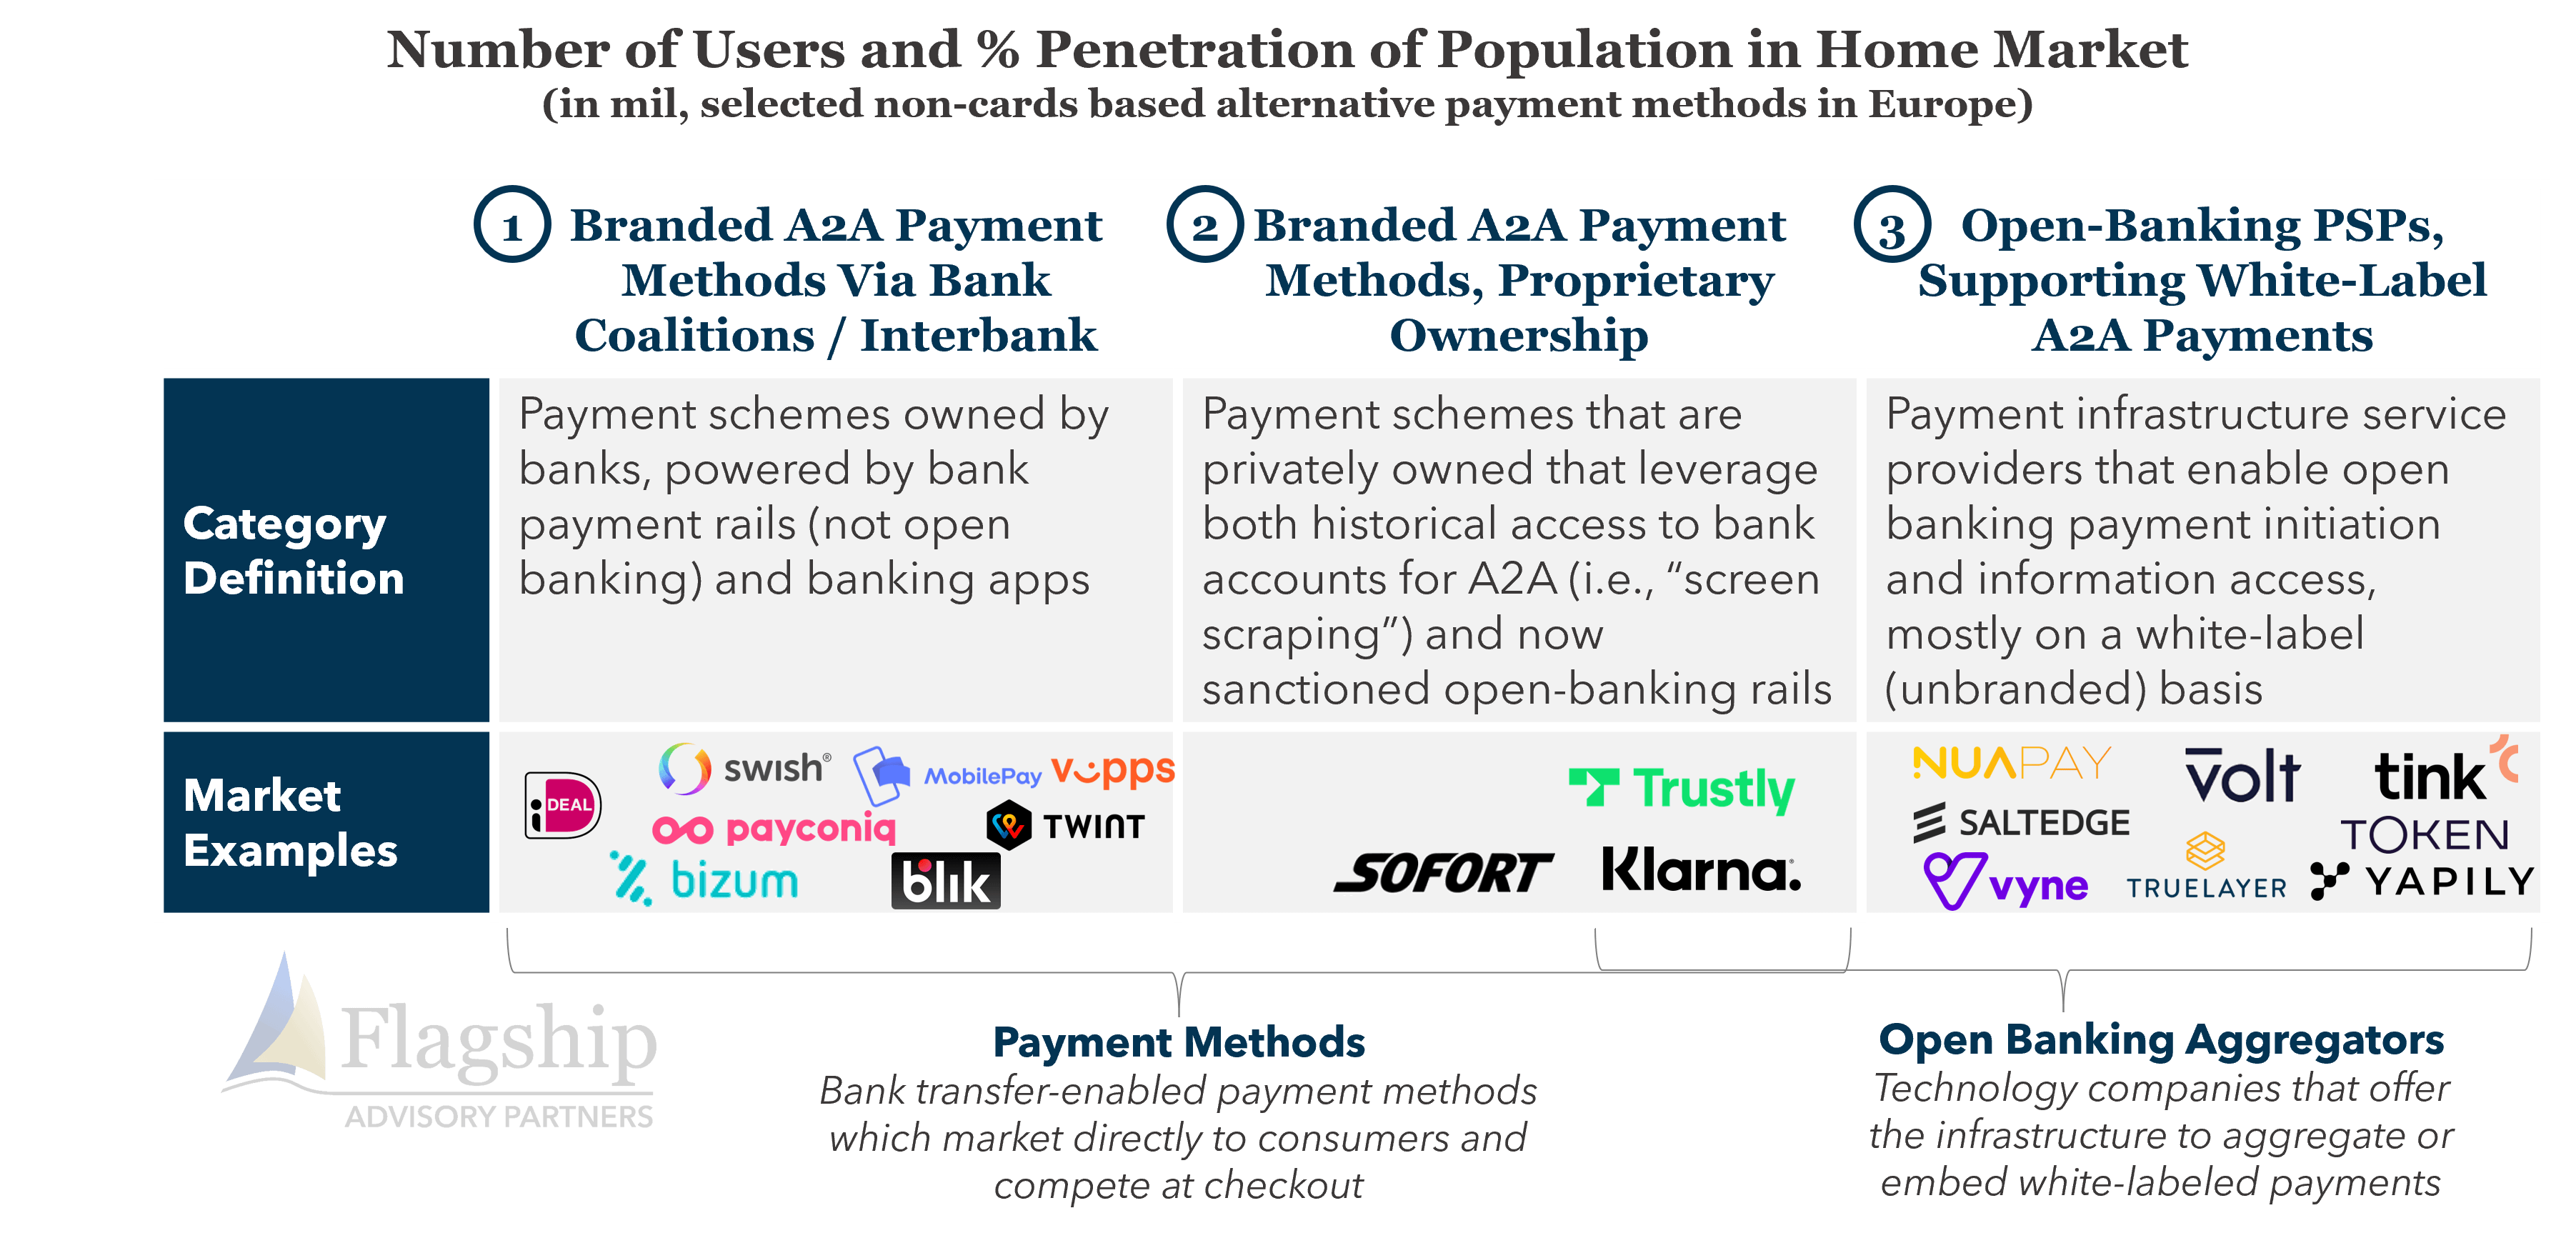 Forms of A2A payments in Europe